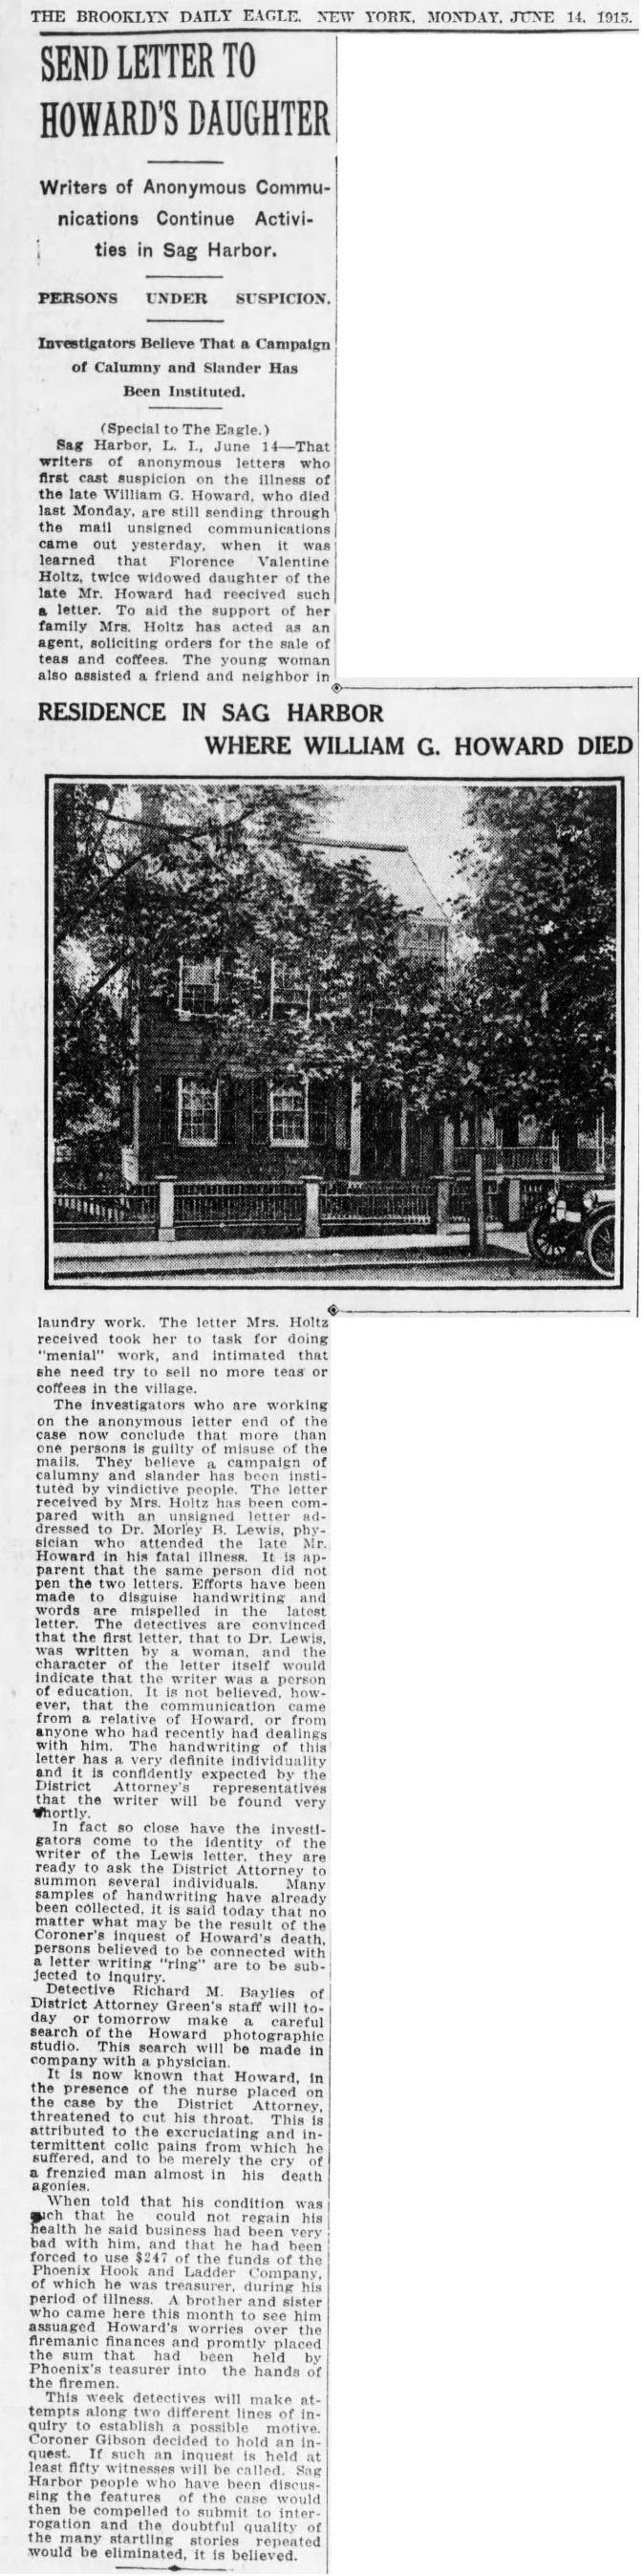 A25 6-14-1915 The Brooklyn Daily Eagle Monday Report